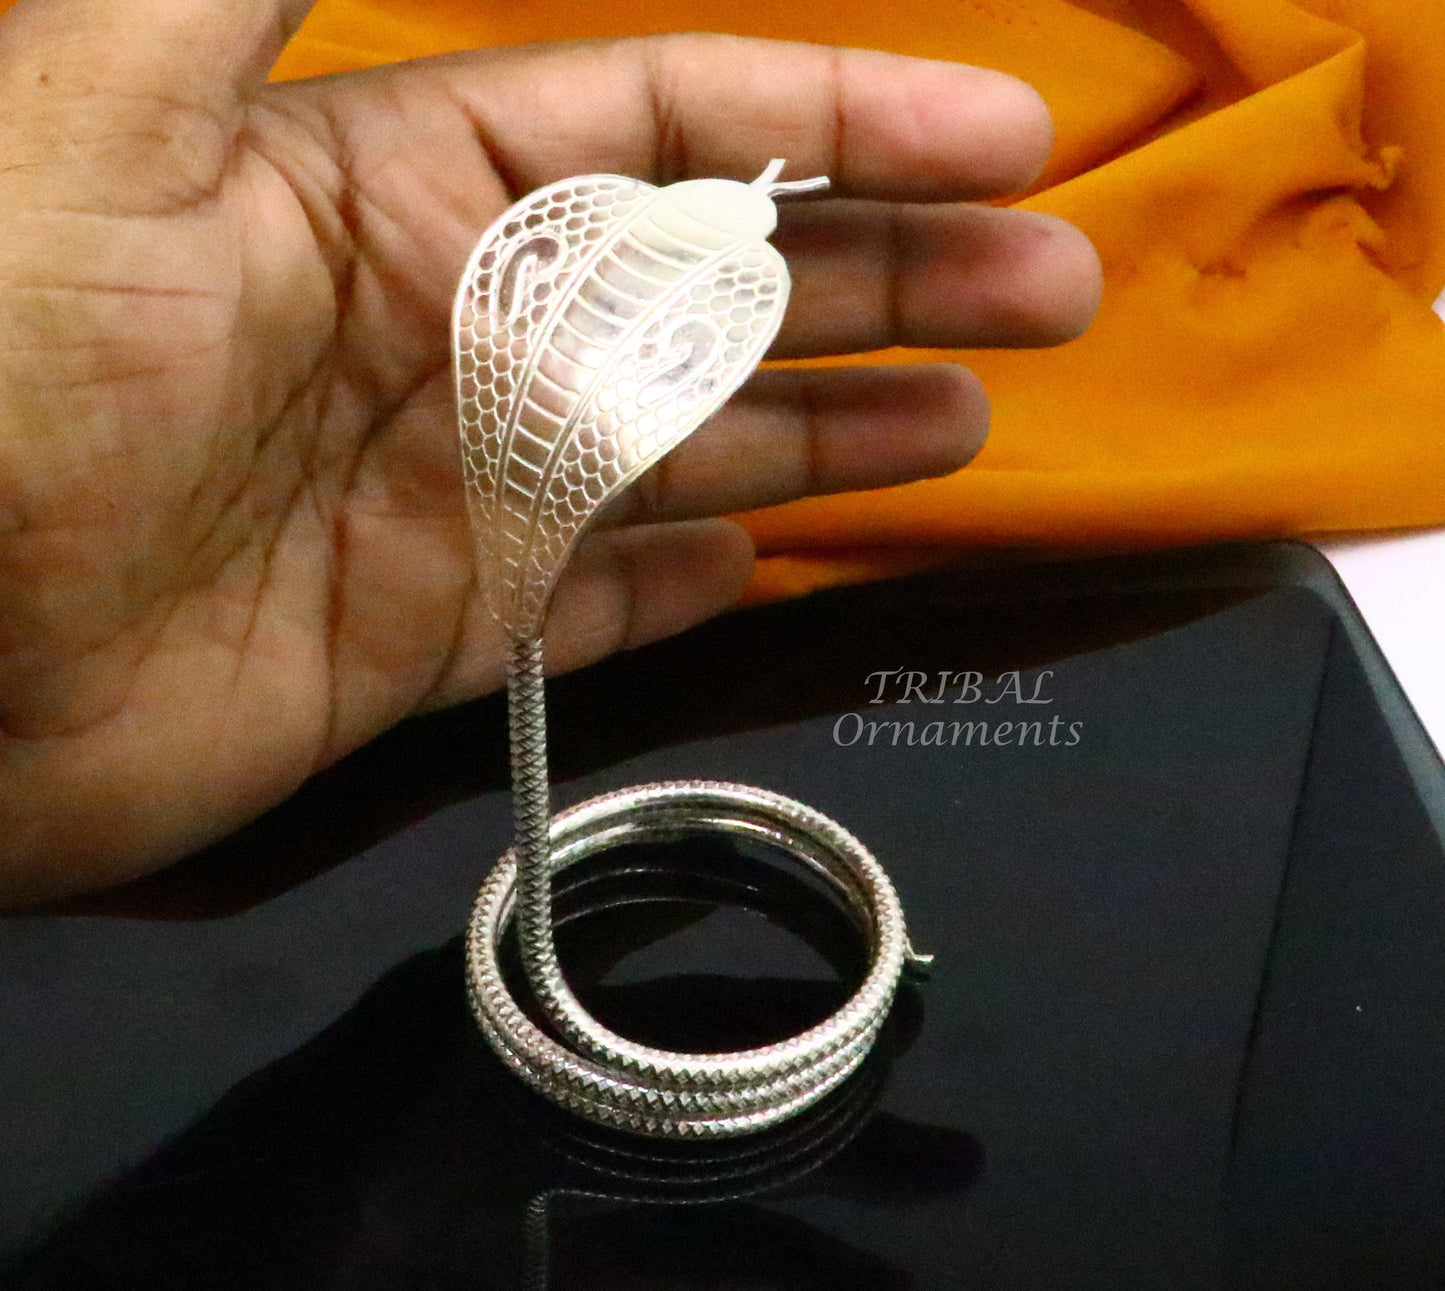 4.2" Shiva Snake Solid silver handmade Divine vintage style snake or shiva snake for puja or worshipping, solid Diwali puja article su811 - TRIBAL ORNAMENTS